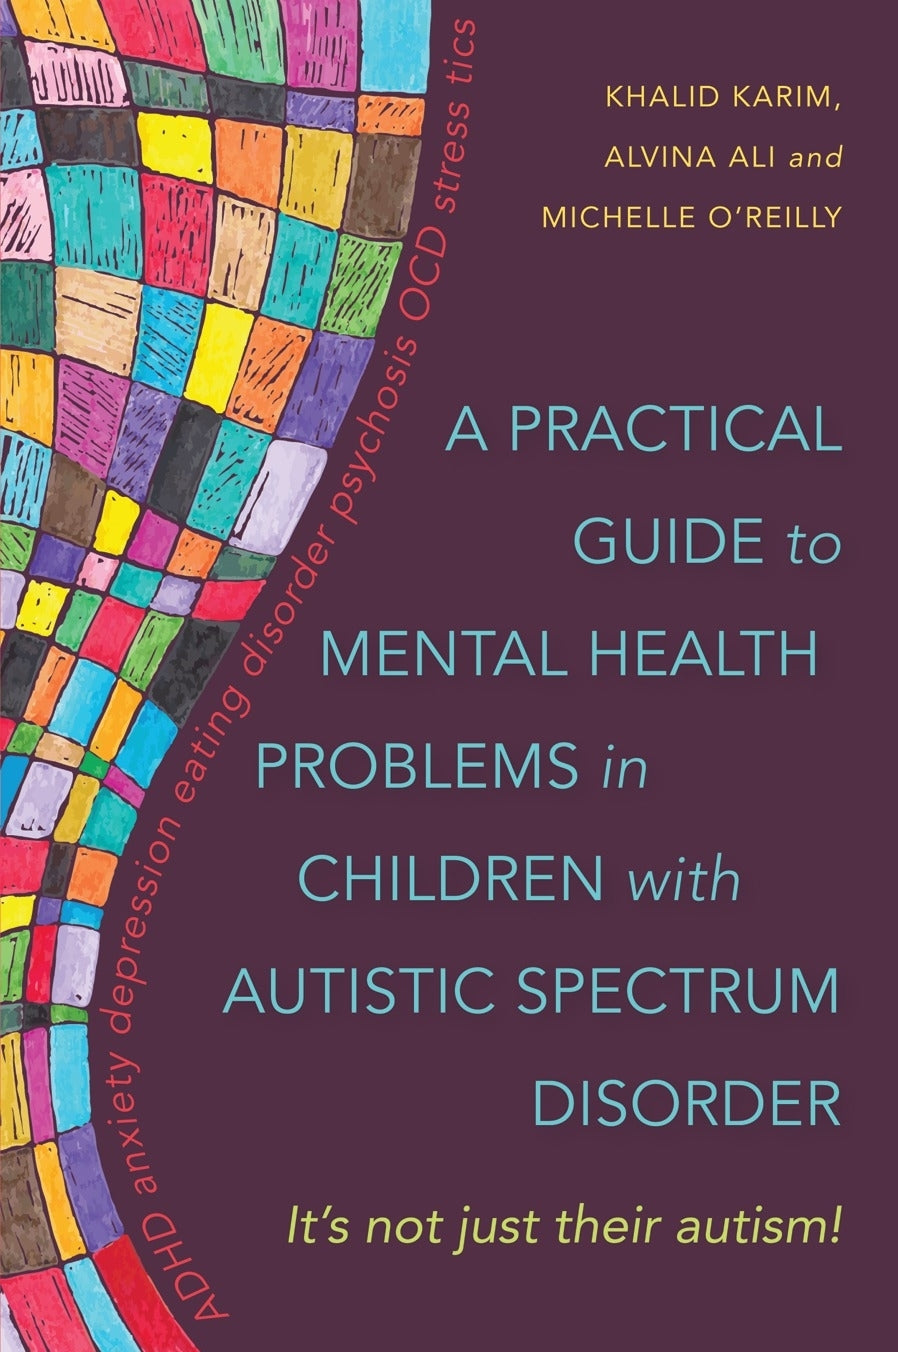 A Practical Guide to Mental Health Problems in Children with Autistic Spectrum Disorder by Khalid Karim, Alvina Ali, Michelle O'Reilly